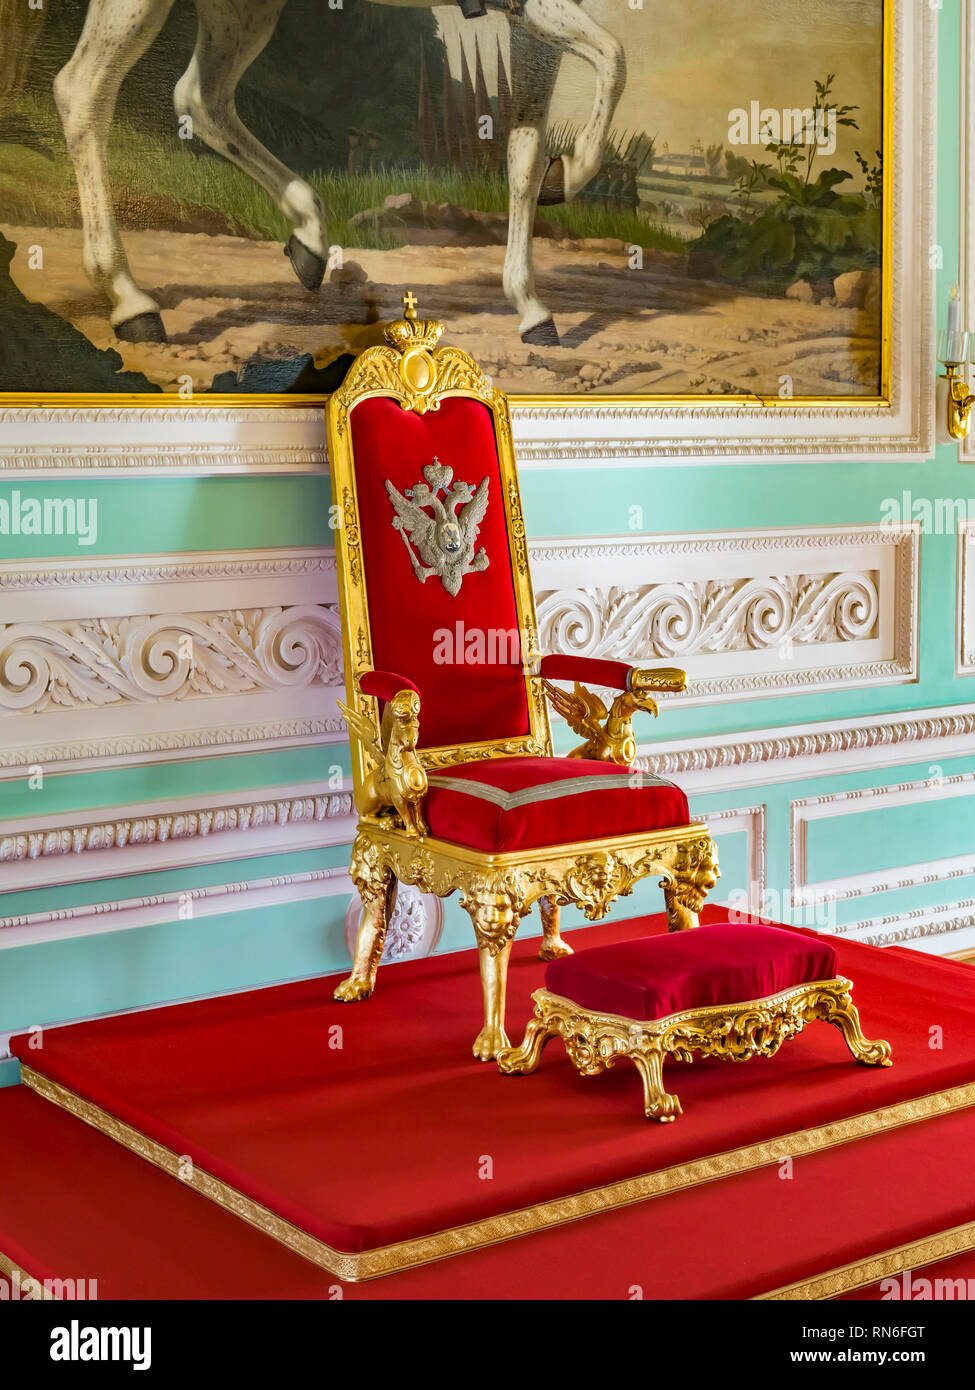 18 September 2018: Peterhof, St Petersburg, Russia - The coronation throne of Nicholas I in the Neoclassical Throne Room of Peterhof Palace. Stock Photo